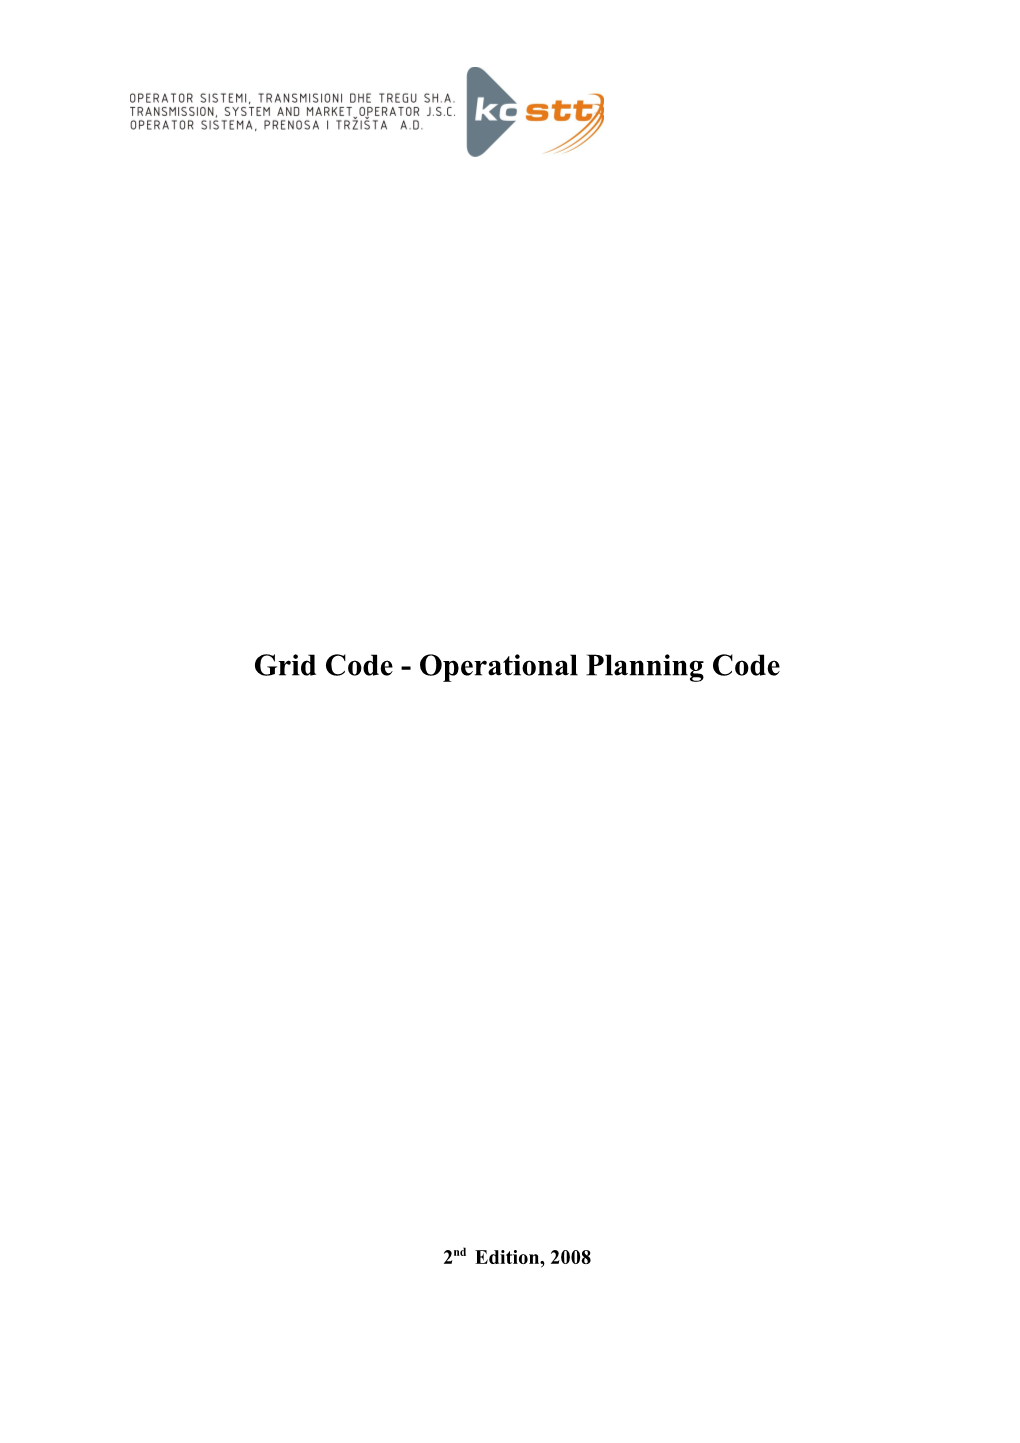 Grid Code - Operational Planning Code